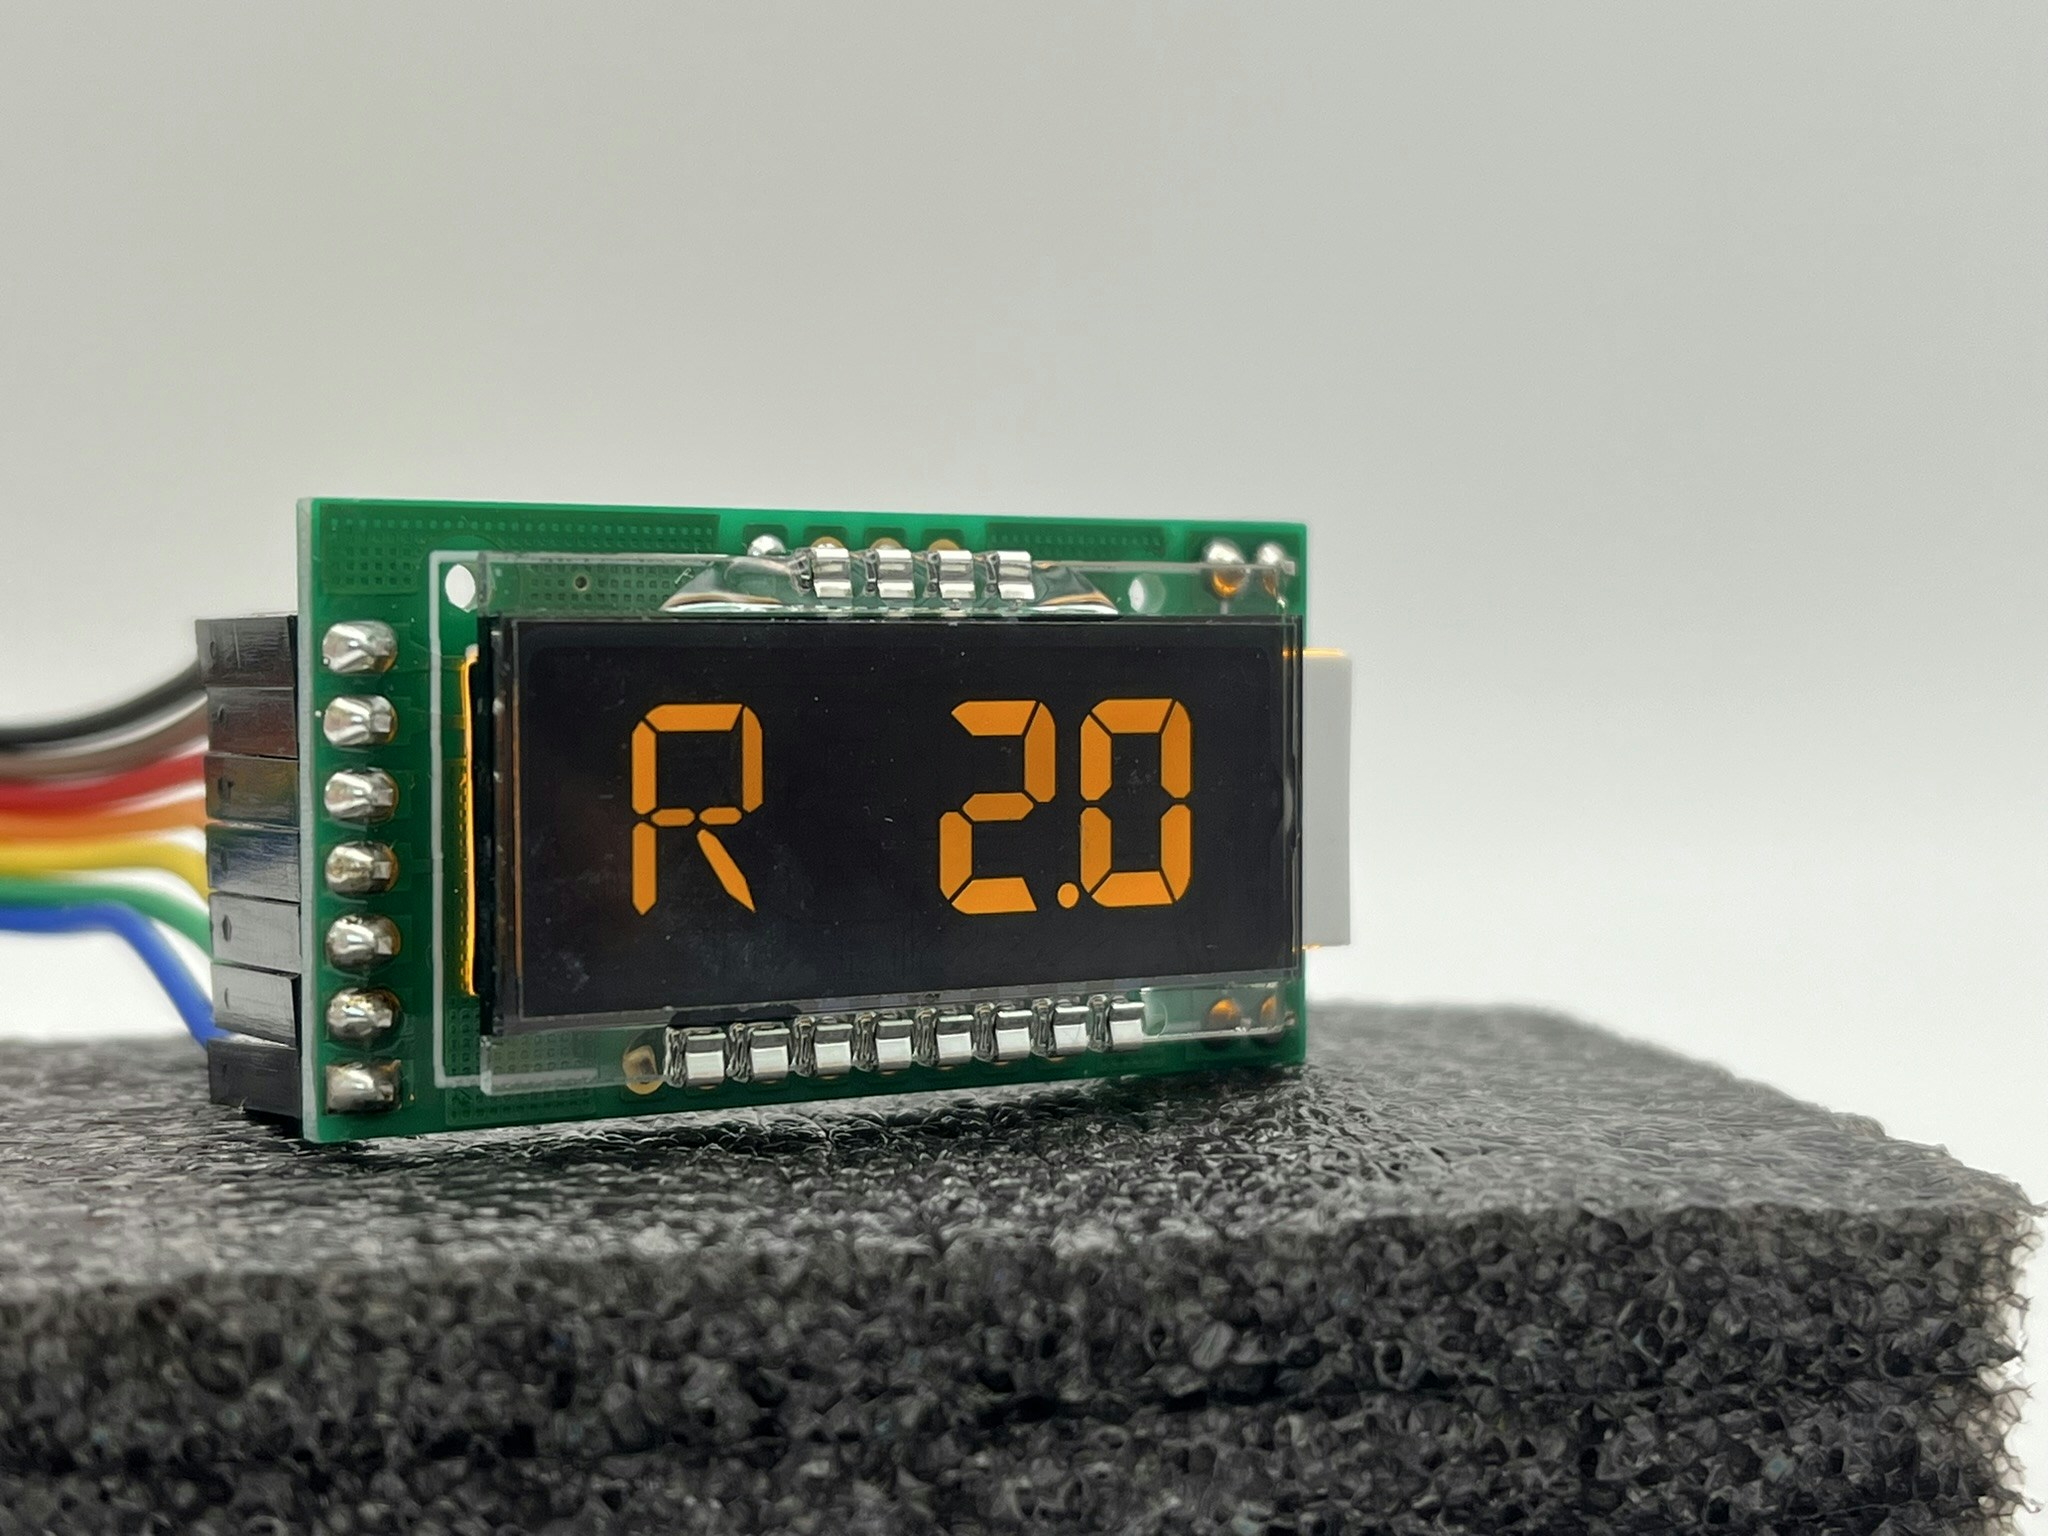 Kav Simulations Releases A320 Family LCD Displays